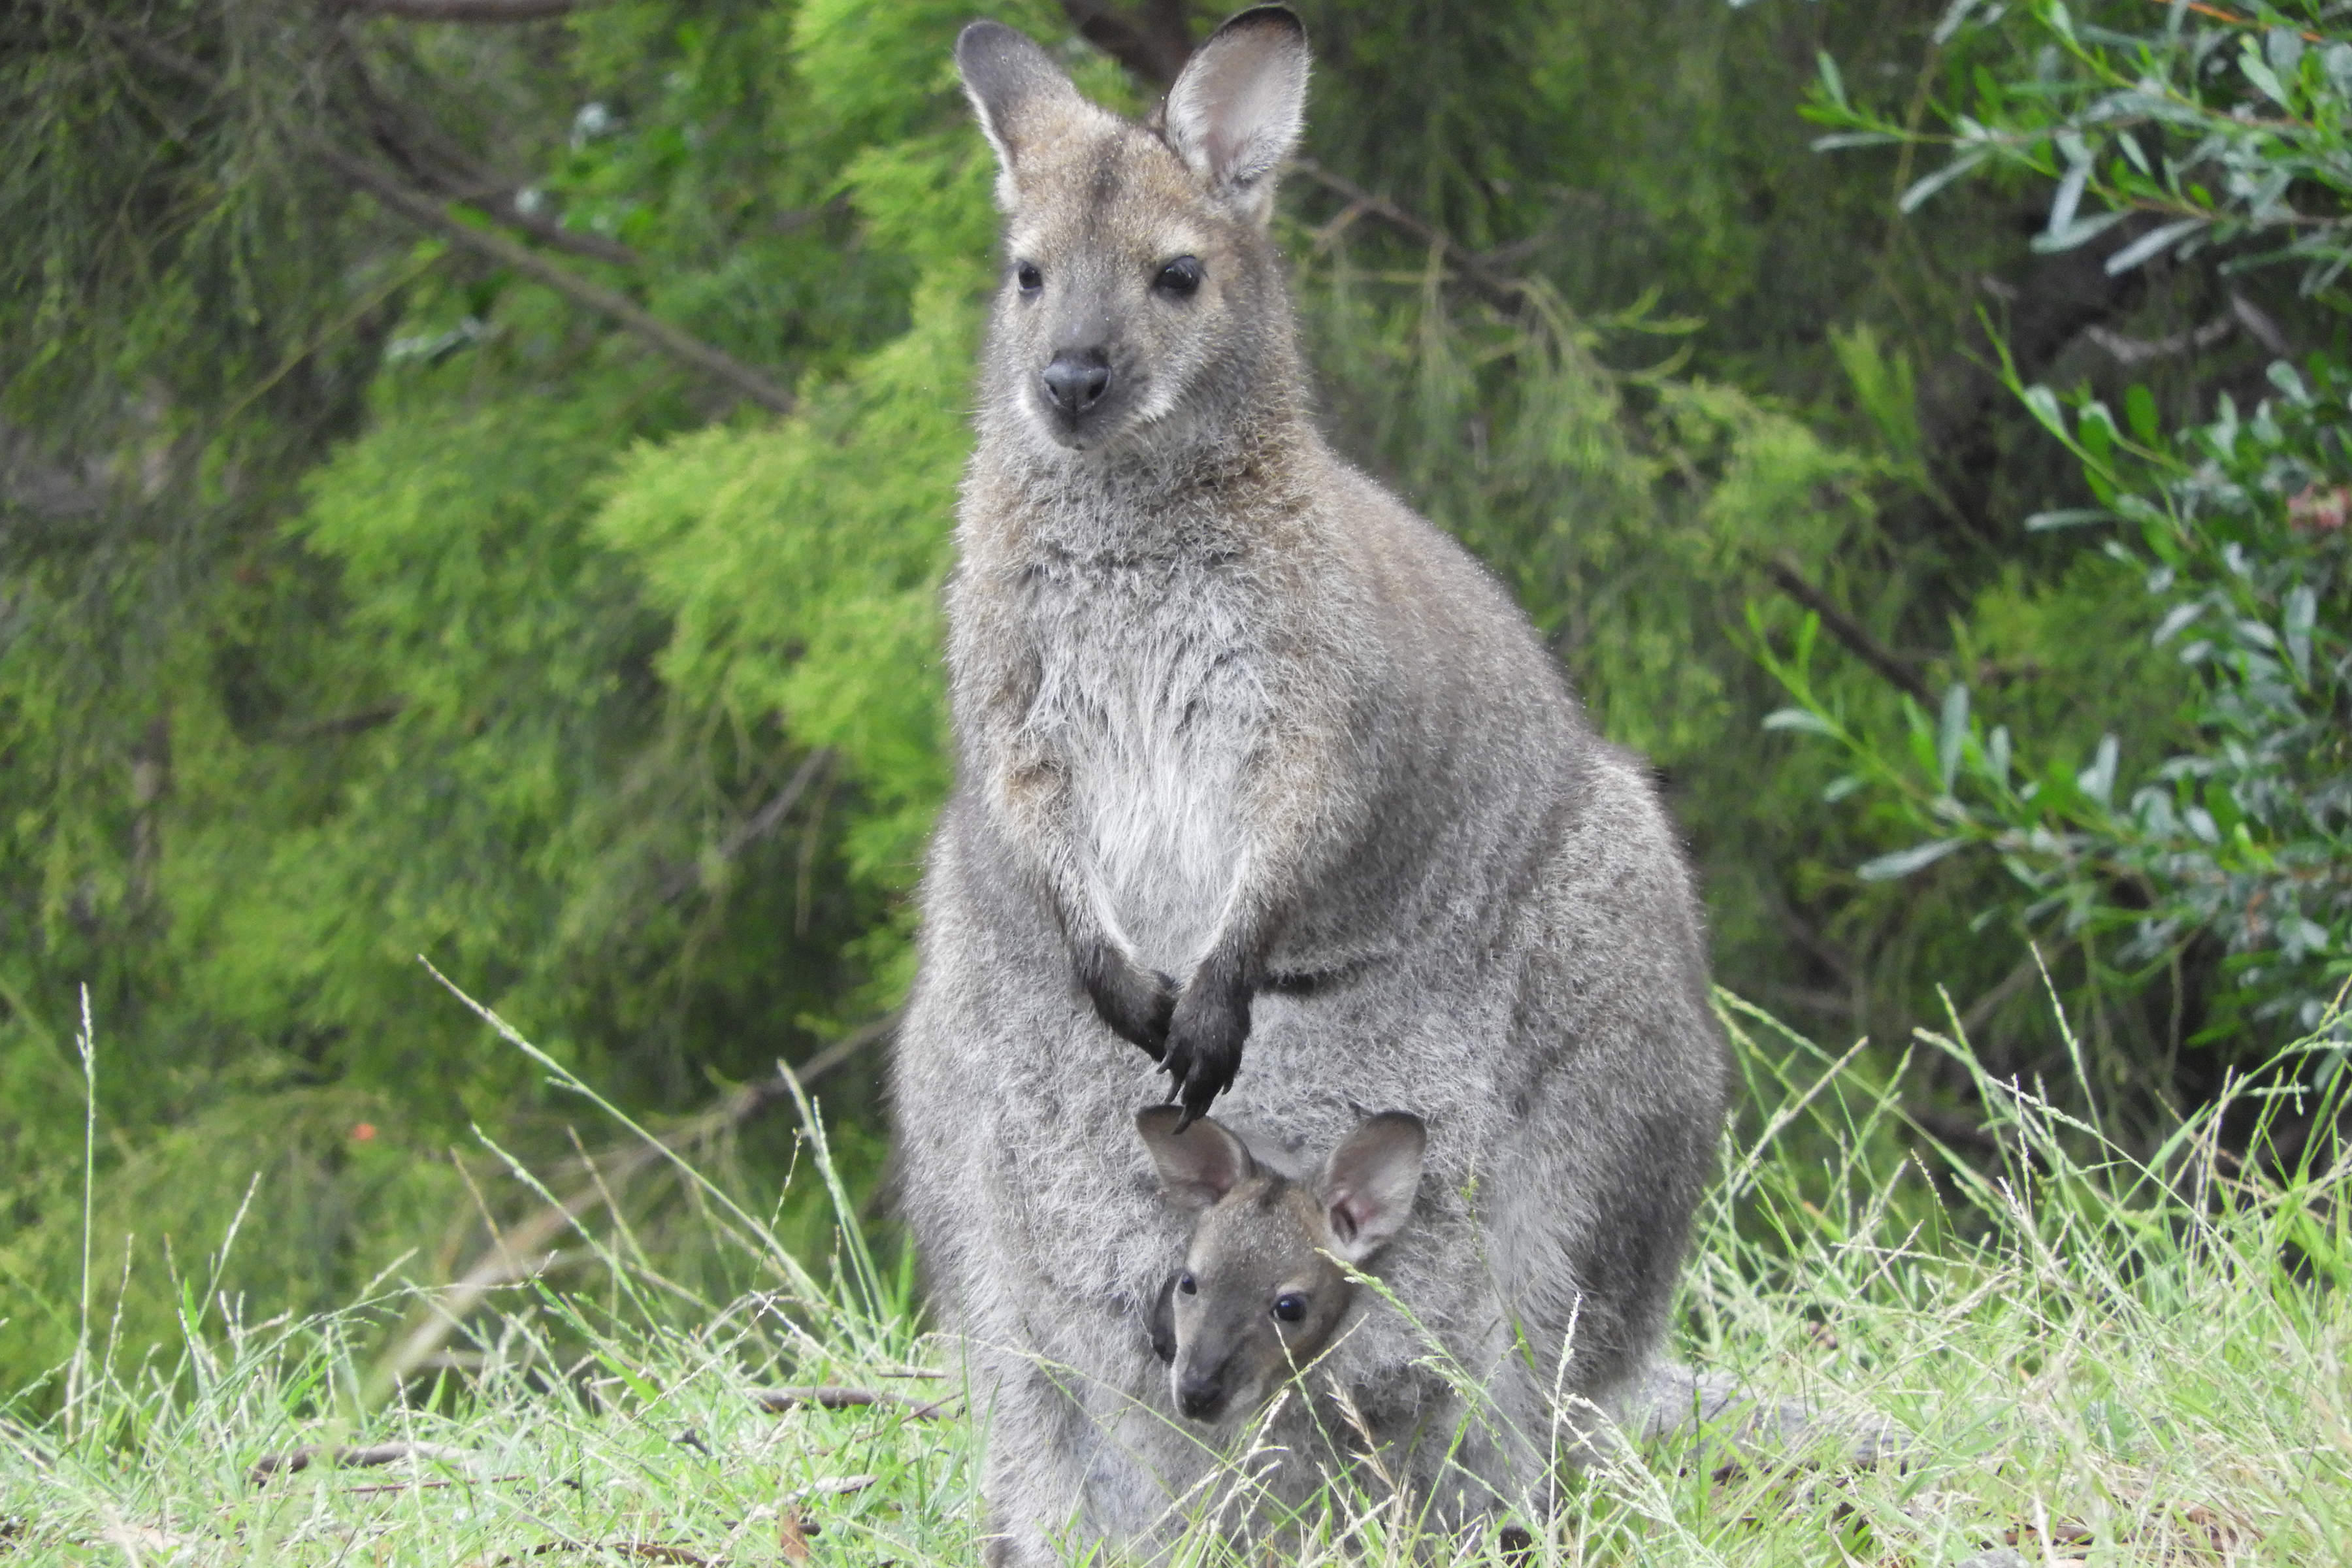 A Bennett’s wallaby with a joey on Catherine and David’s Mount Rumney property